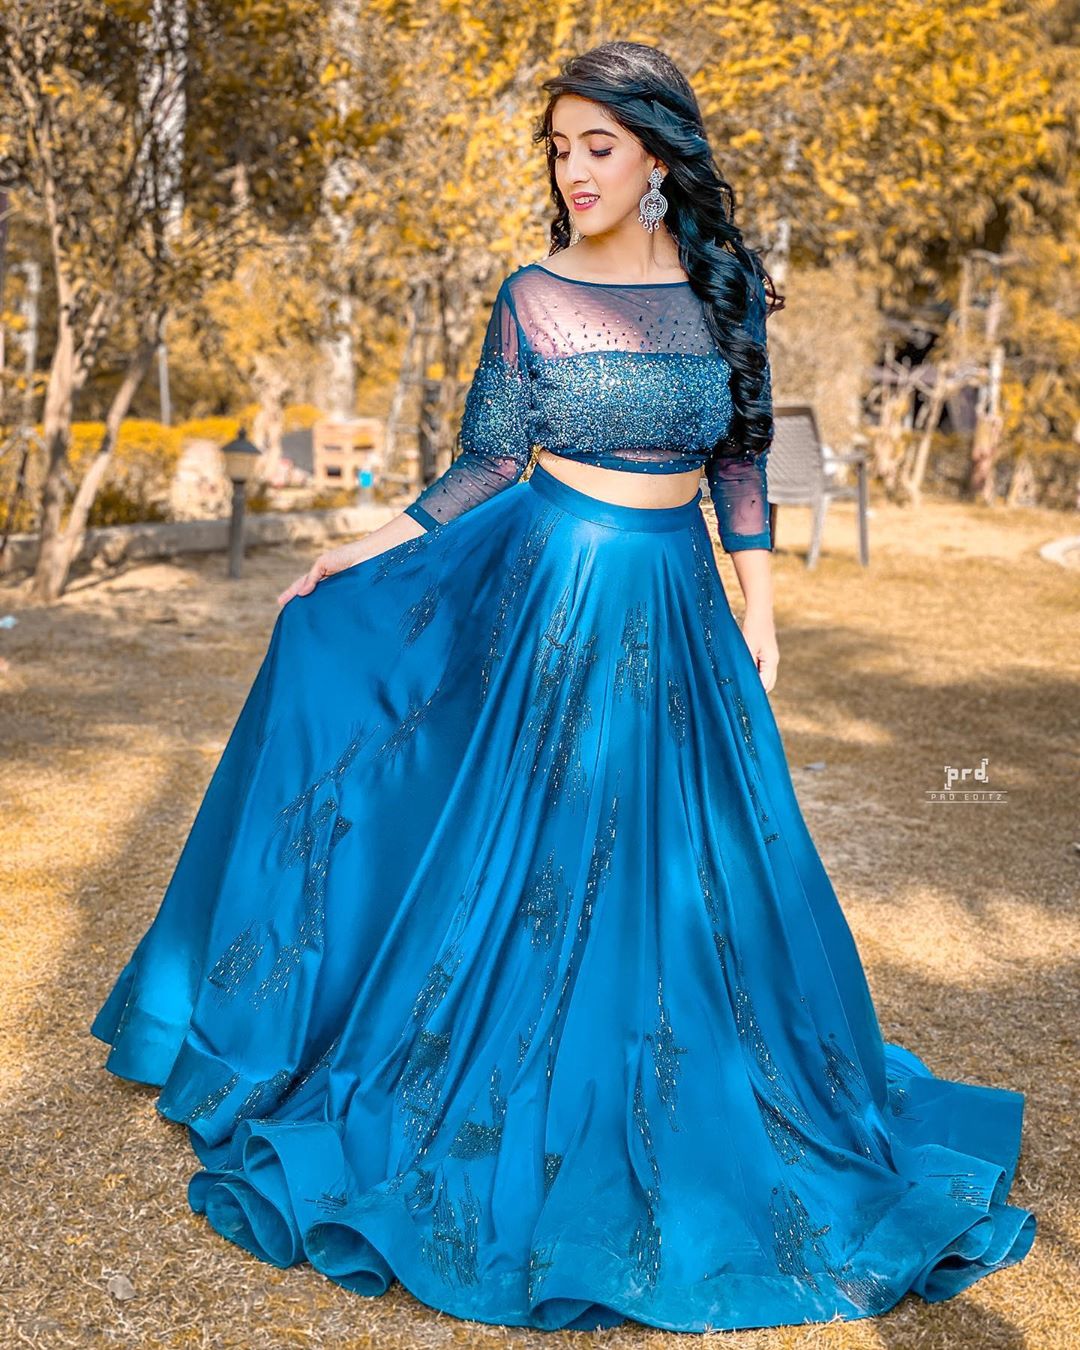 Latest 50 Crop Top and Lehenga Designs (2022) - Tips and Beauty | Wear crop  top, Lehenga designs, Printed skirts